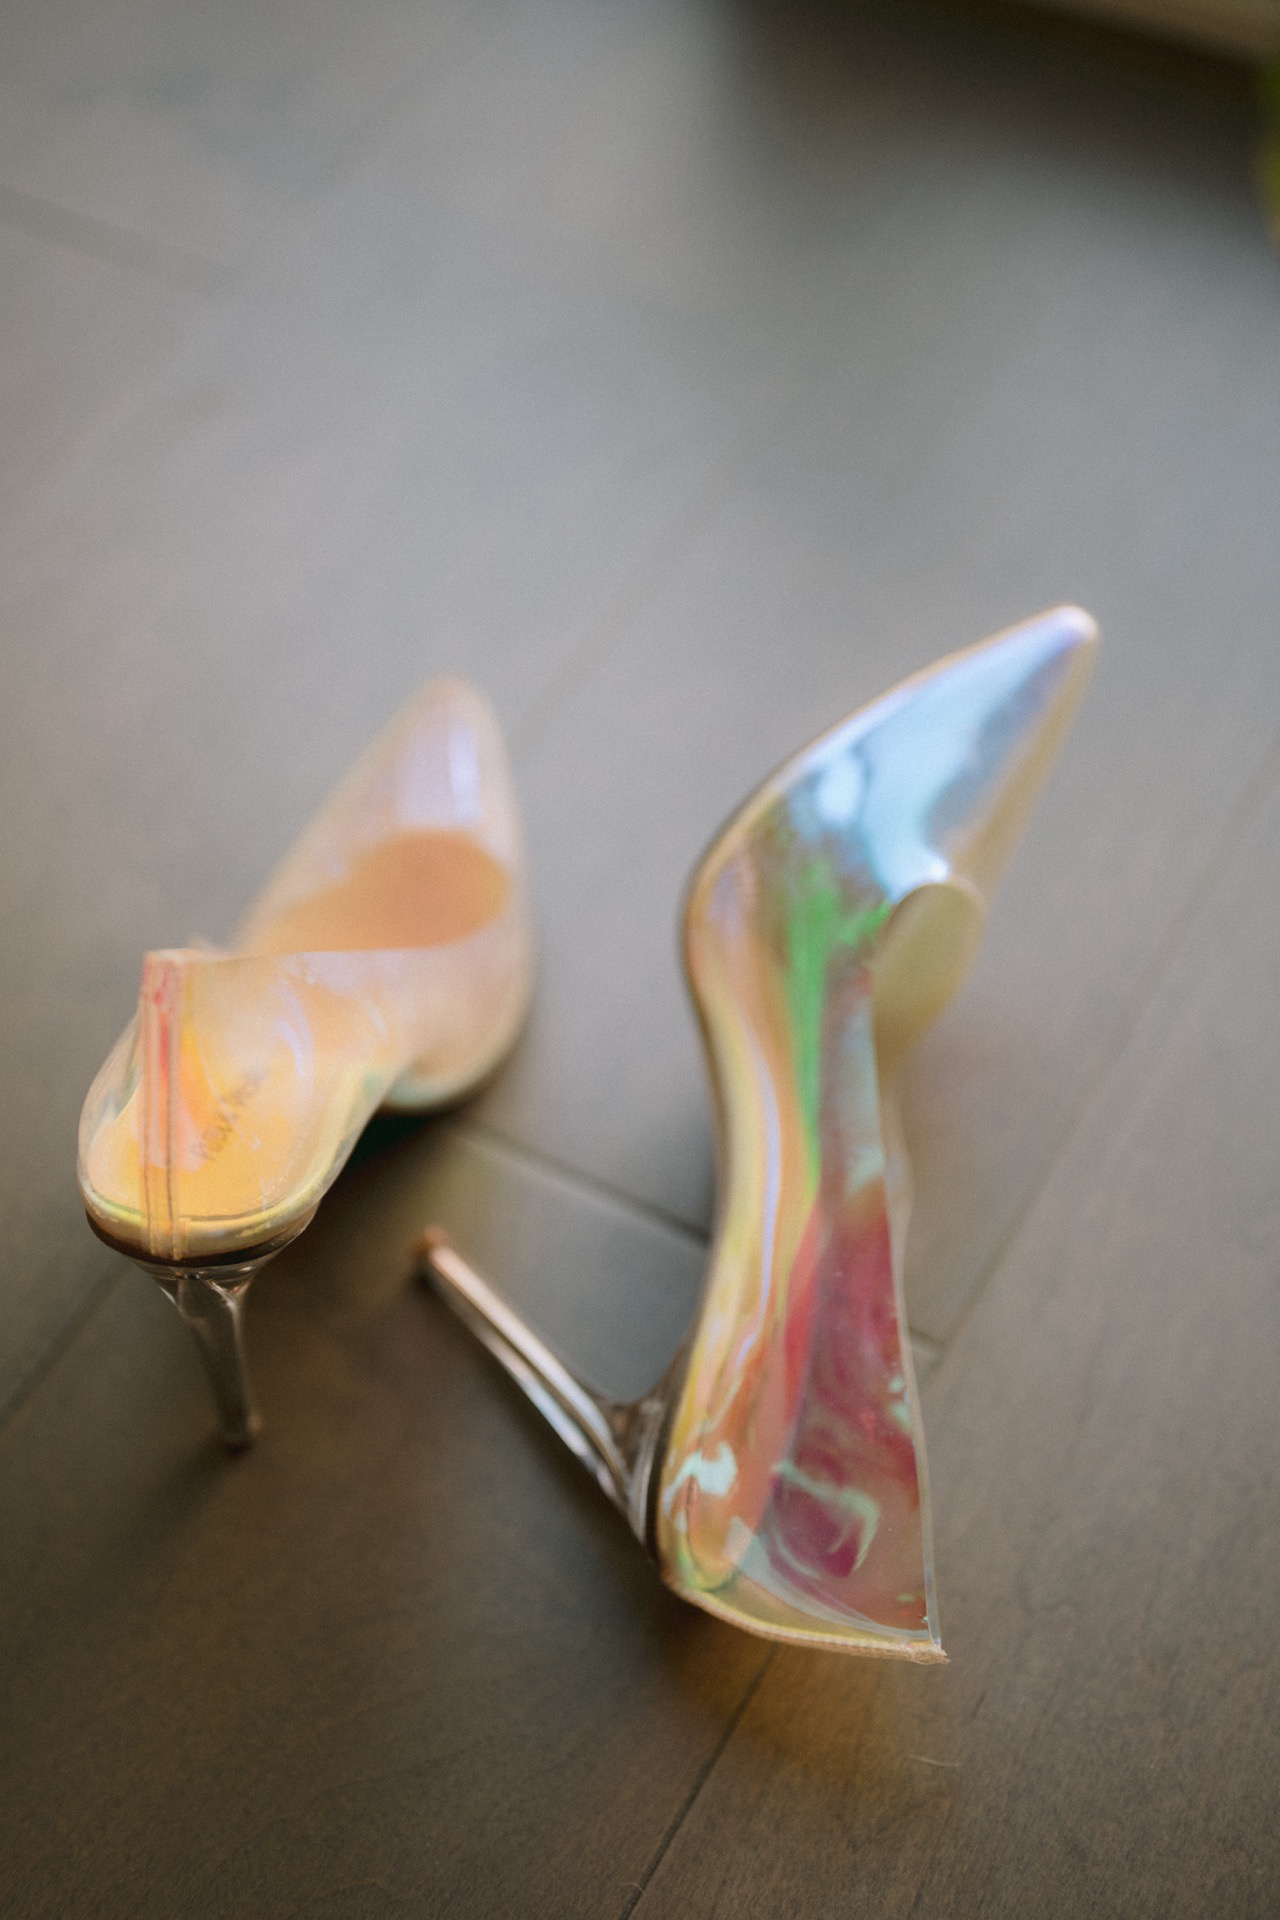 A detailed shot of a colourful wedding shoe.